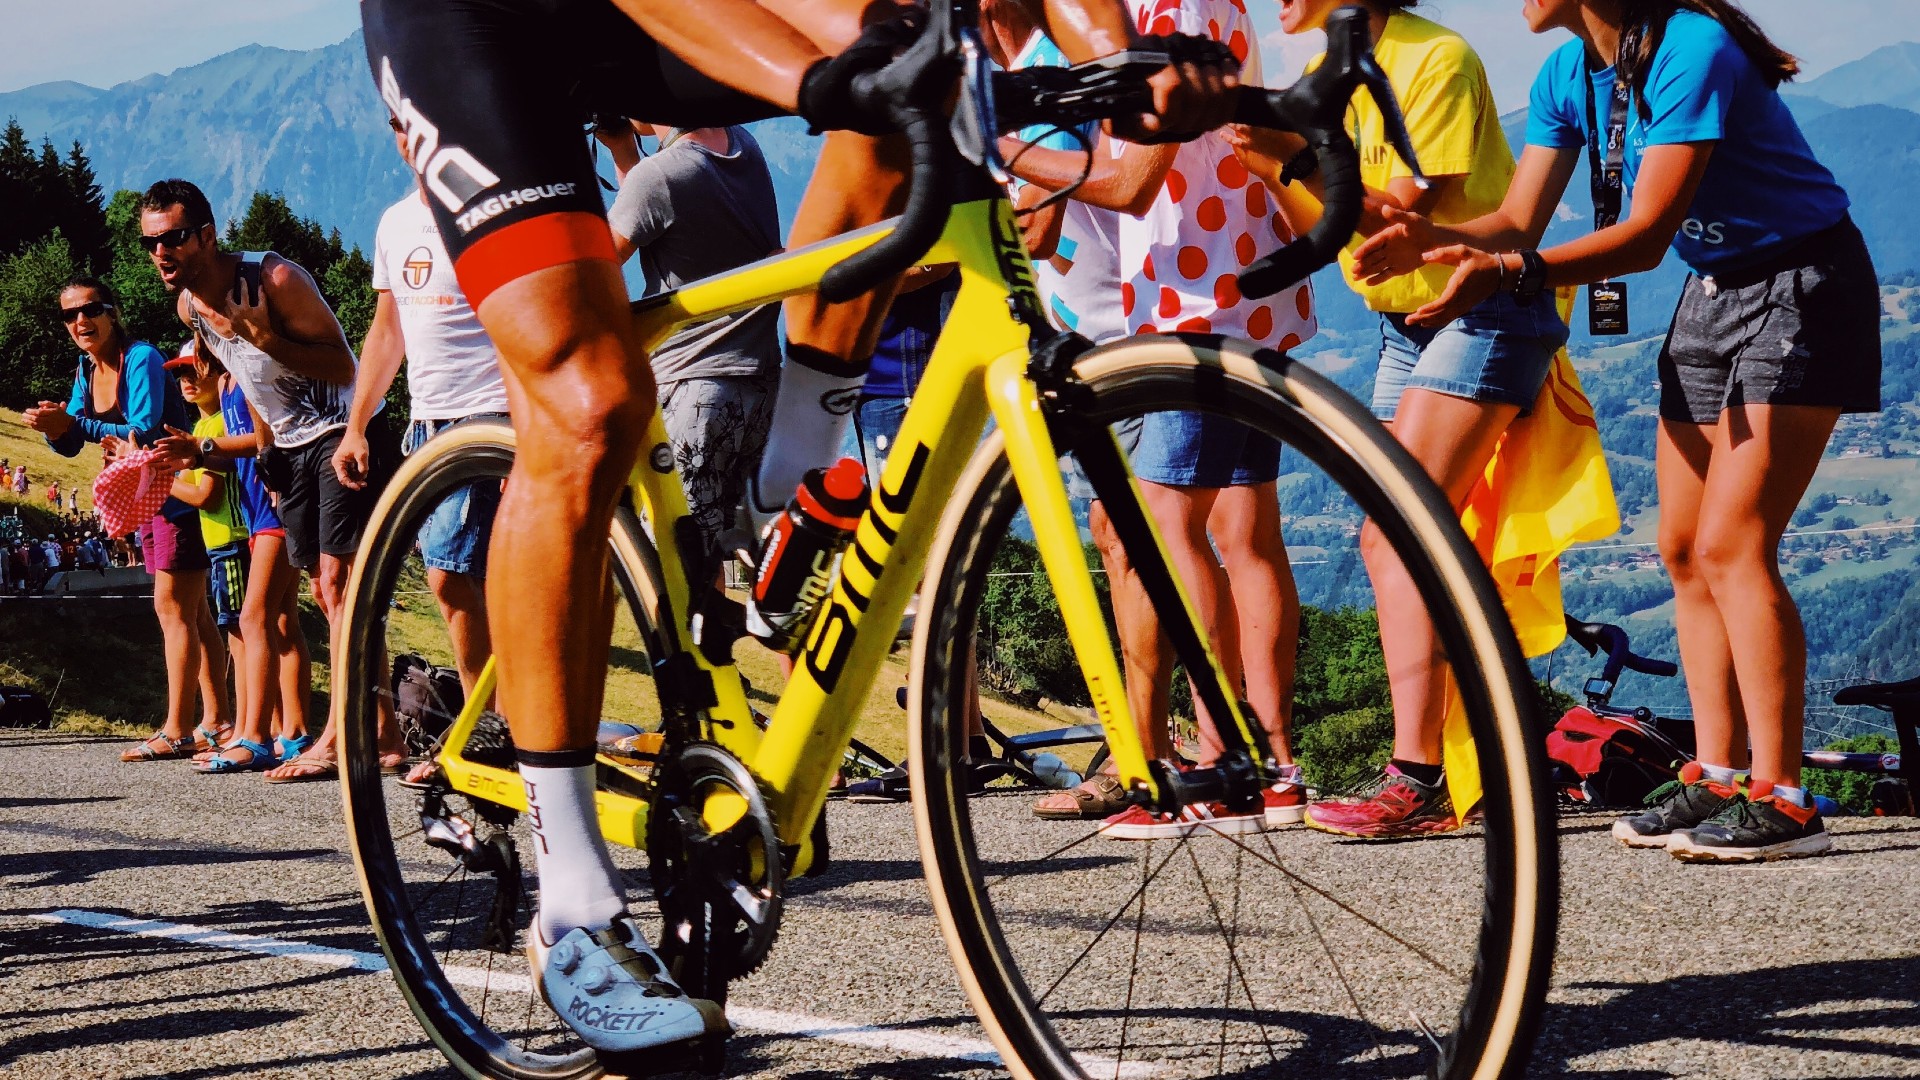 NTT deploys IoT and AI to create live digital twin of Tour de France